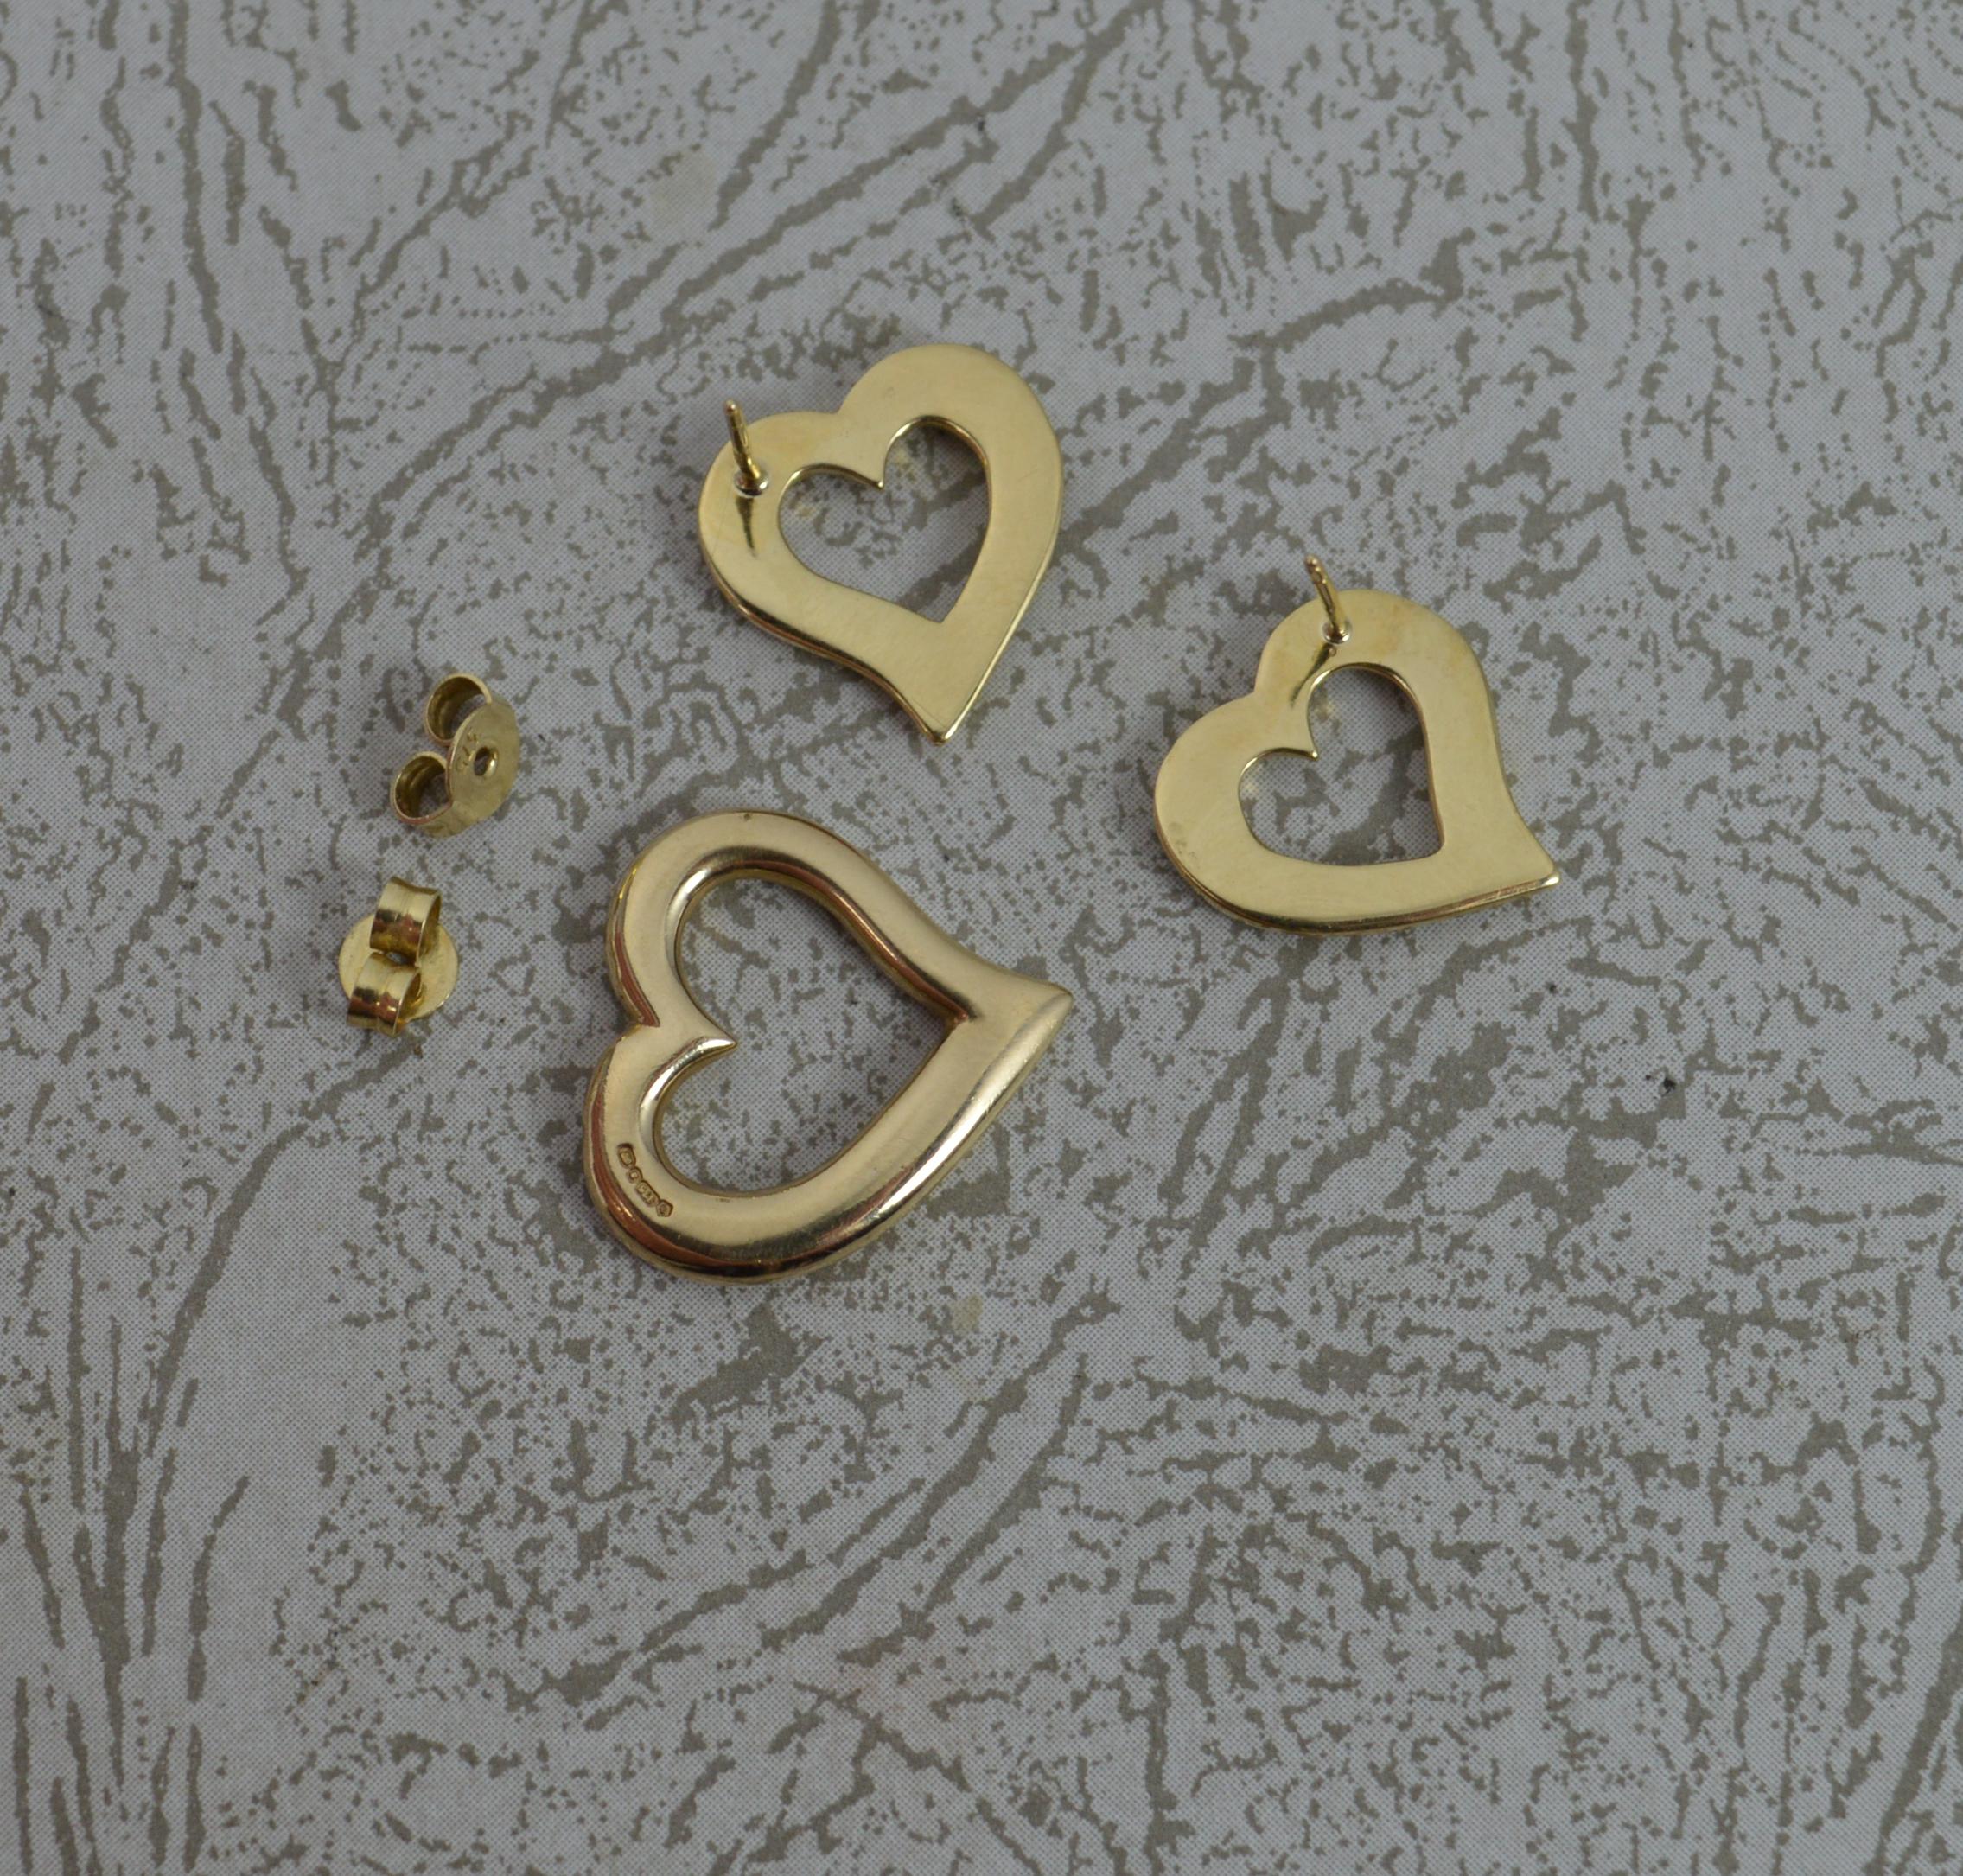 Contemporary Clogau 9 Carat Yellow Gold Cariad Heart Stud Earrings and Pendant